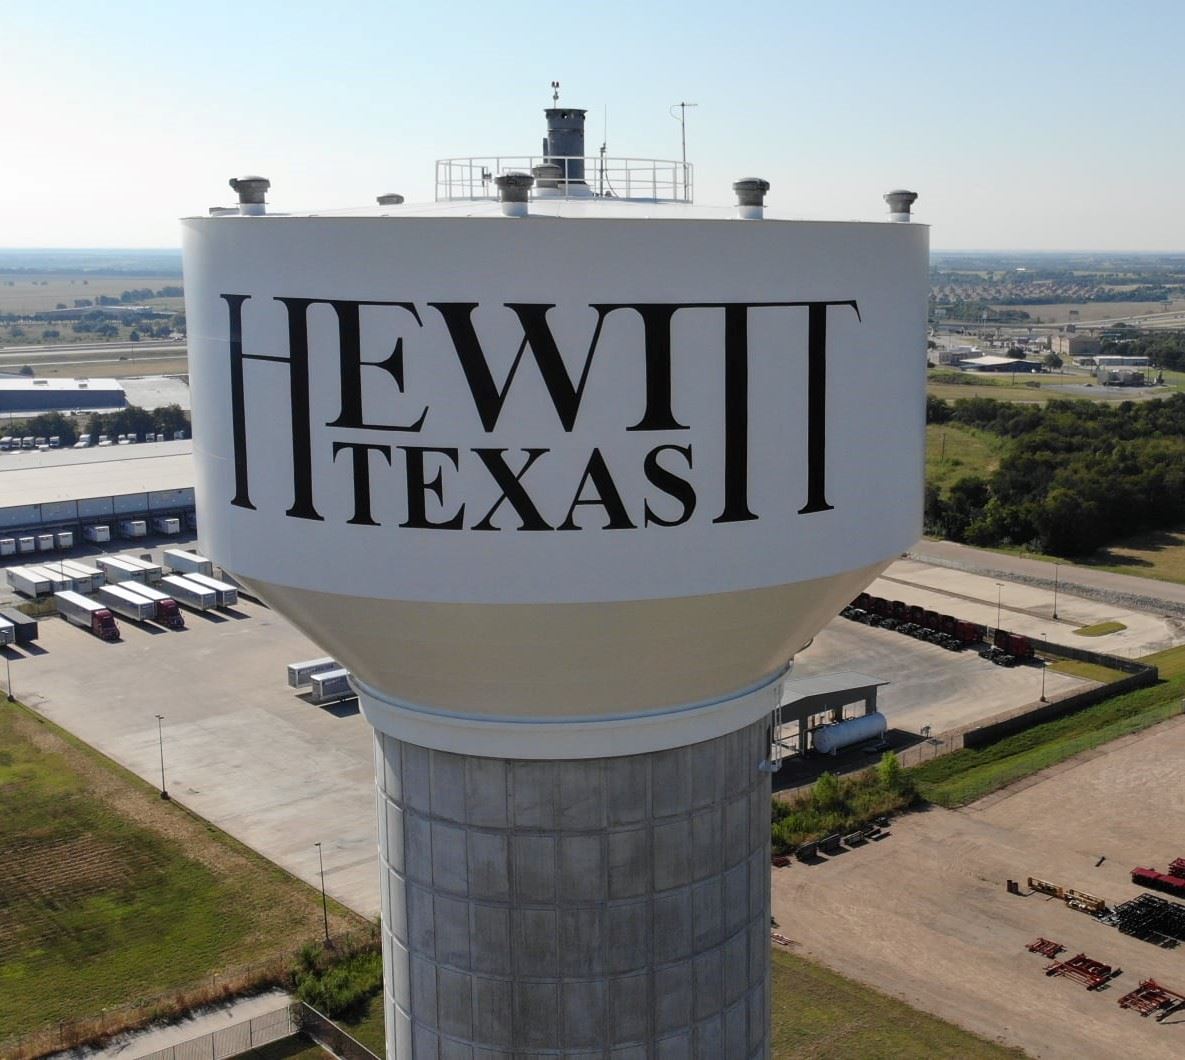 Hewitt, Texas water tower with the city in the background.